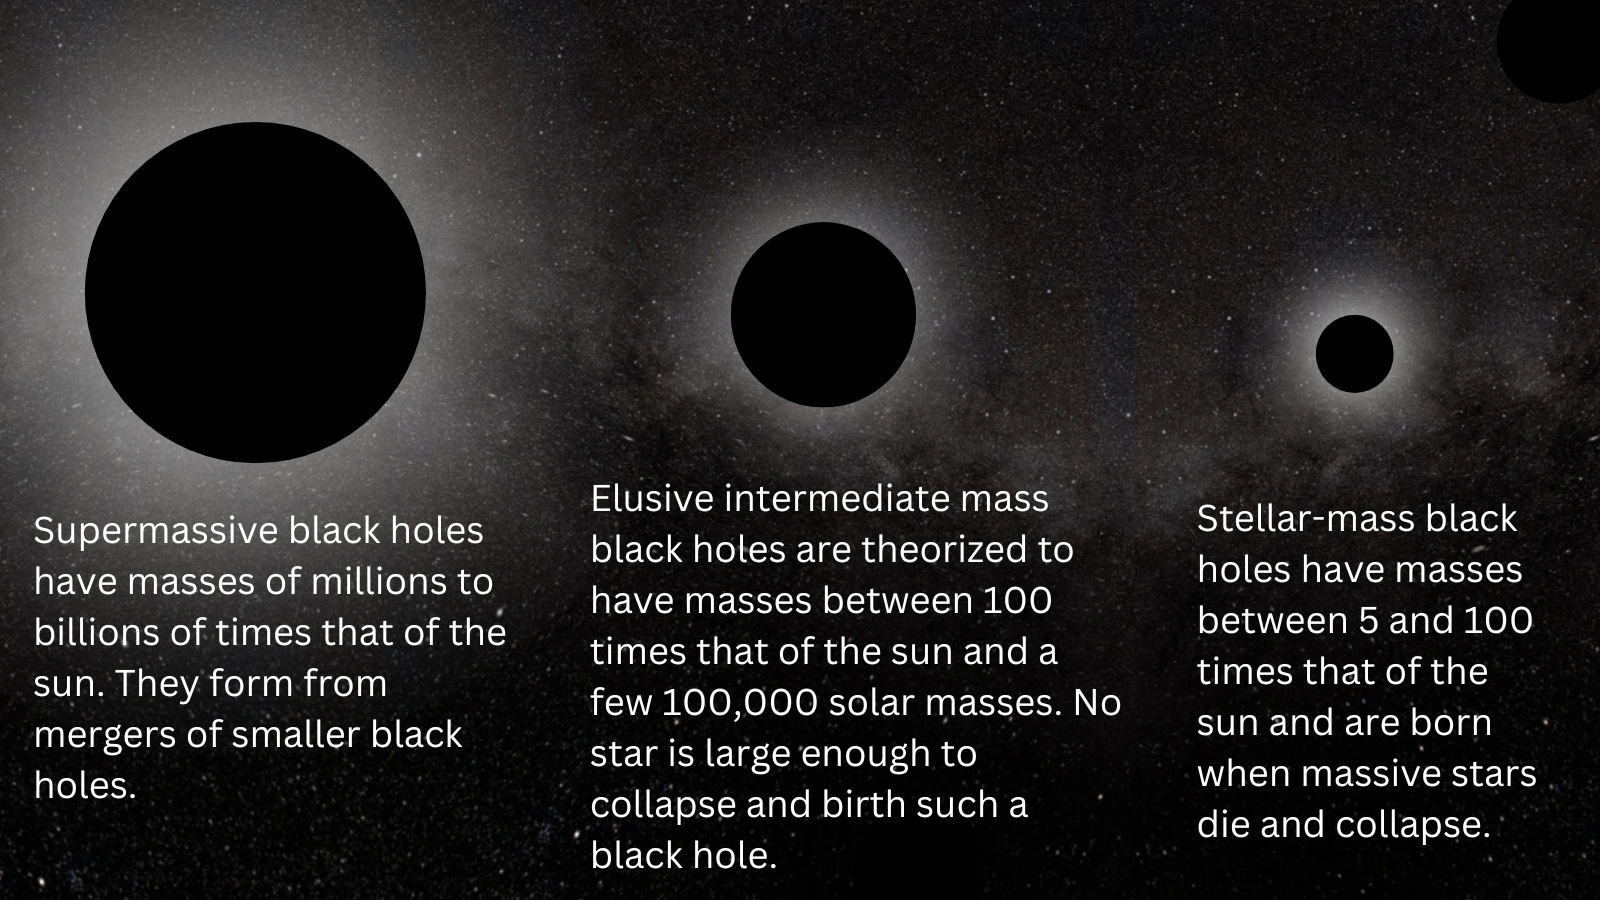 The three black circles with decreasing text size from left to right below the circles illustrate the different masses of different types of black holes.